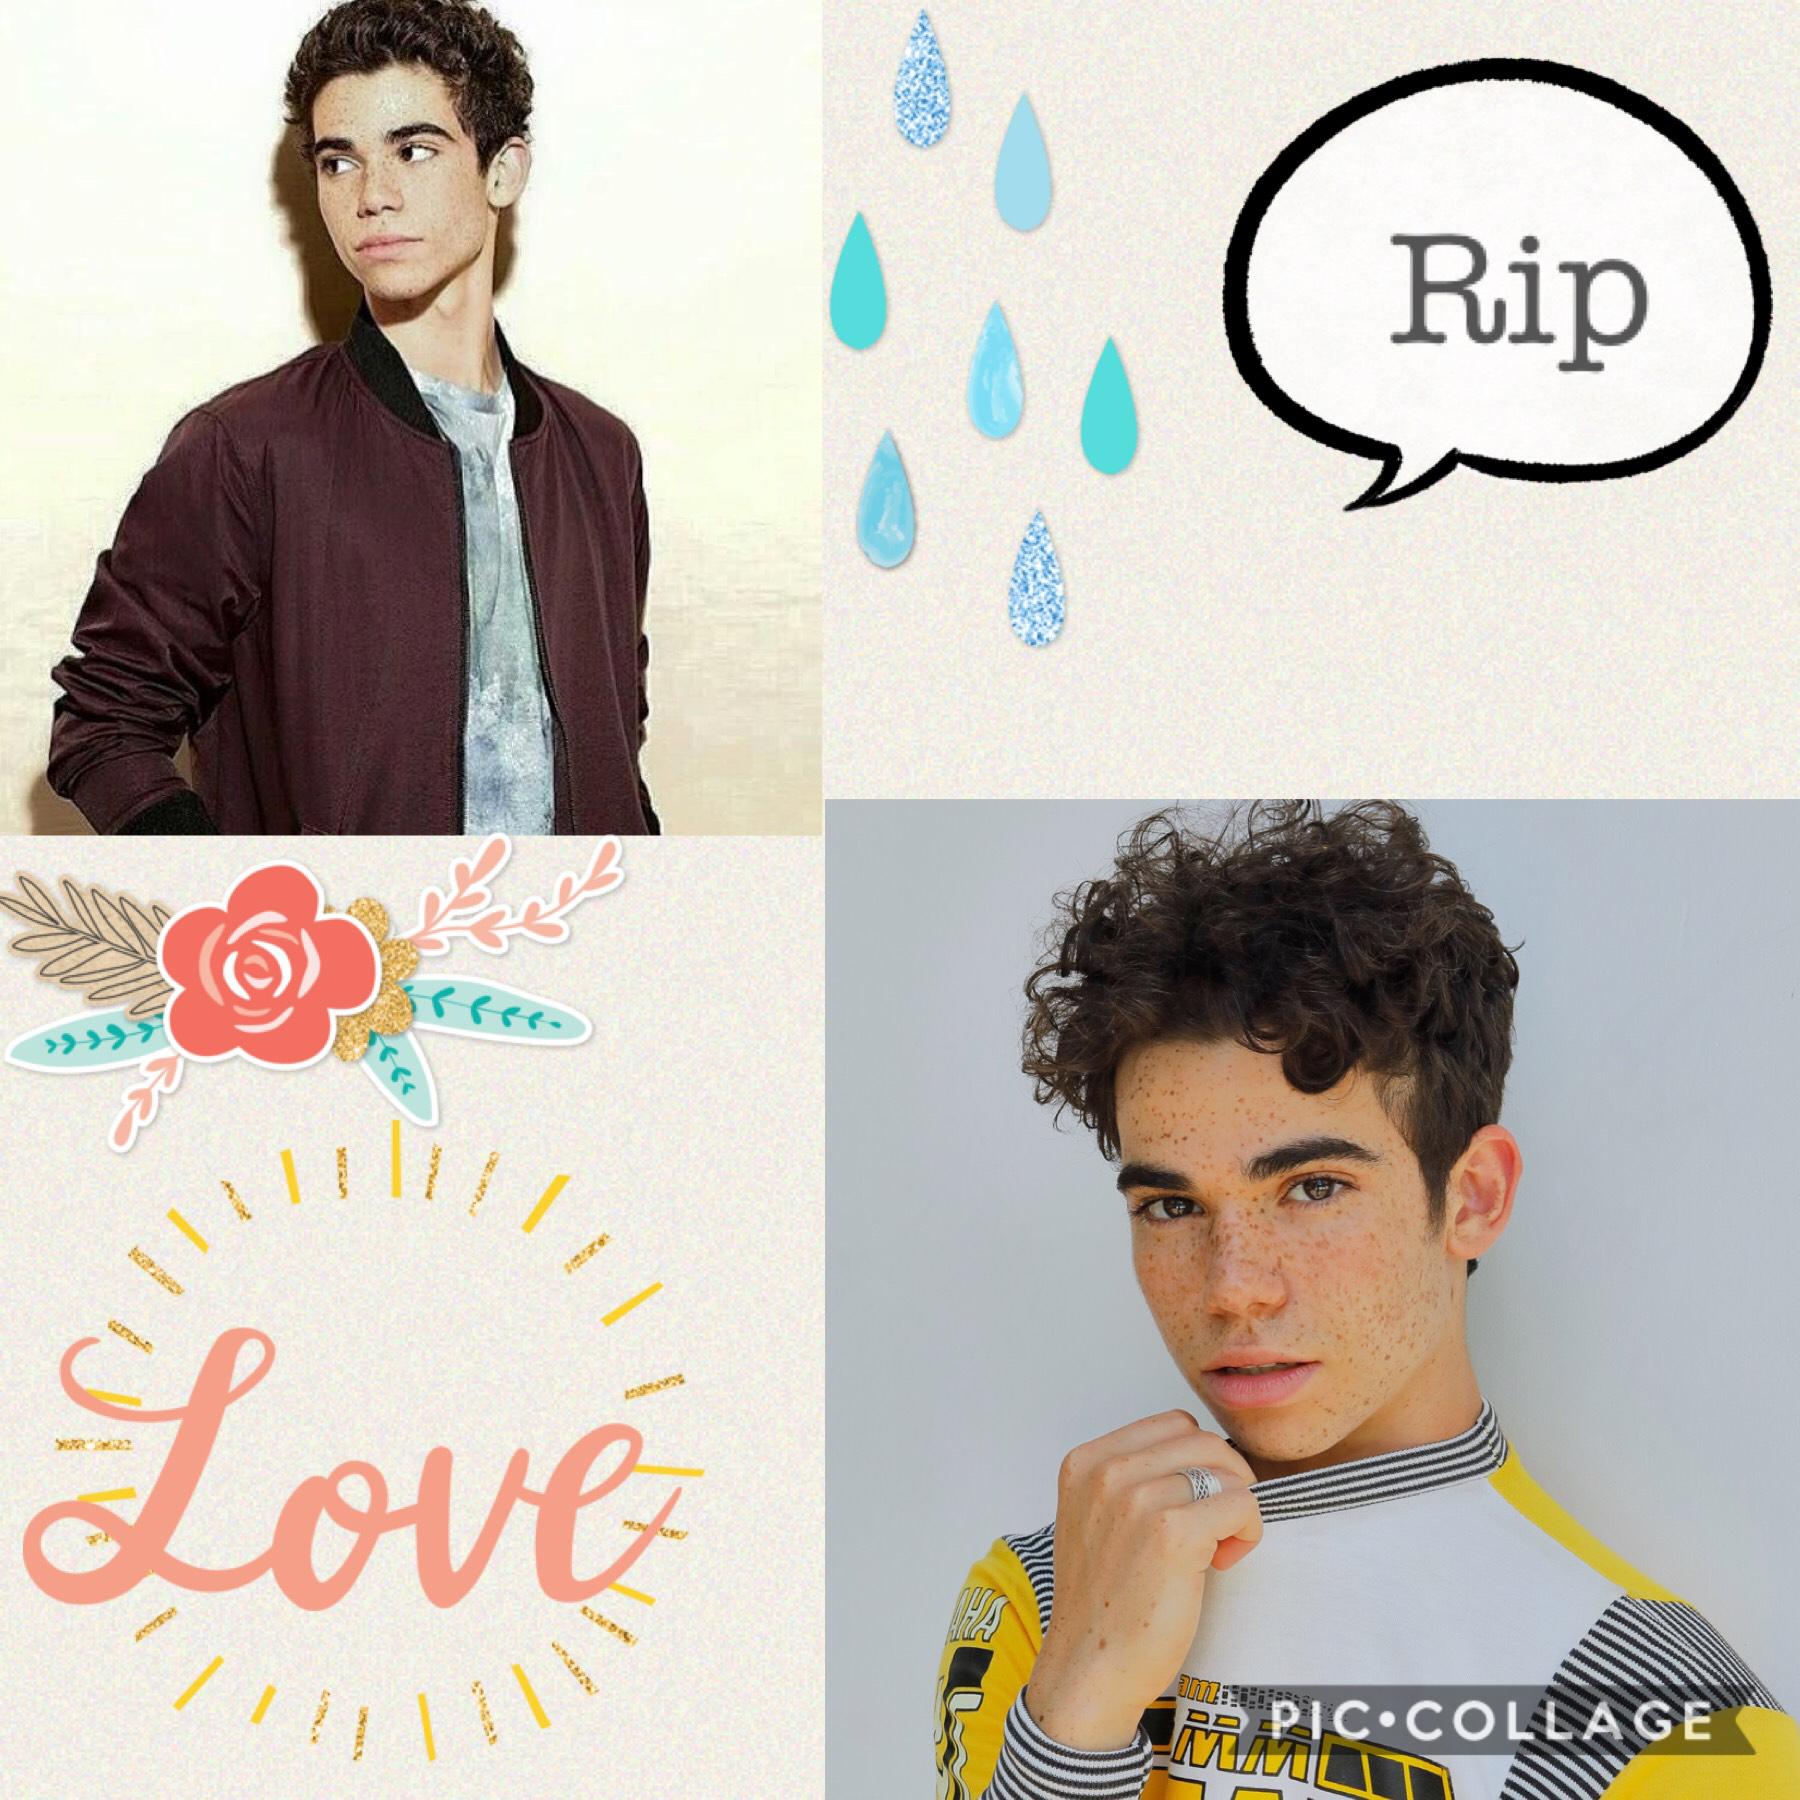 Who’s really upset about Cameron Boyce’s death